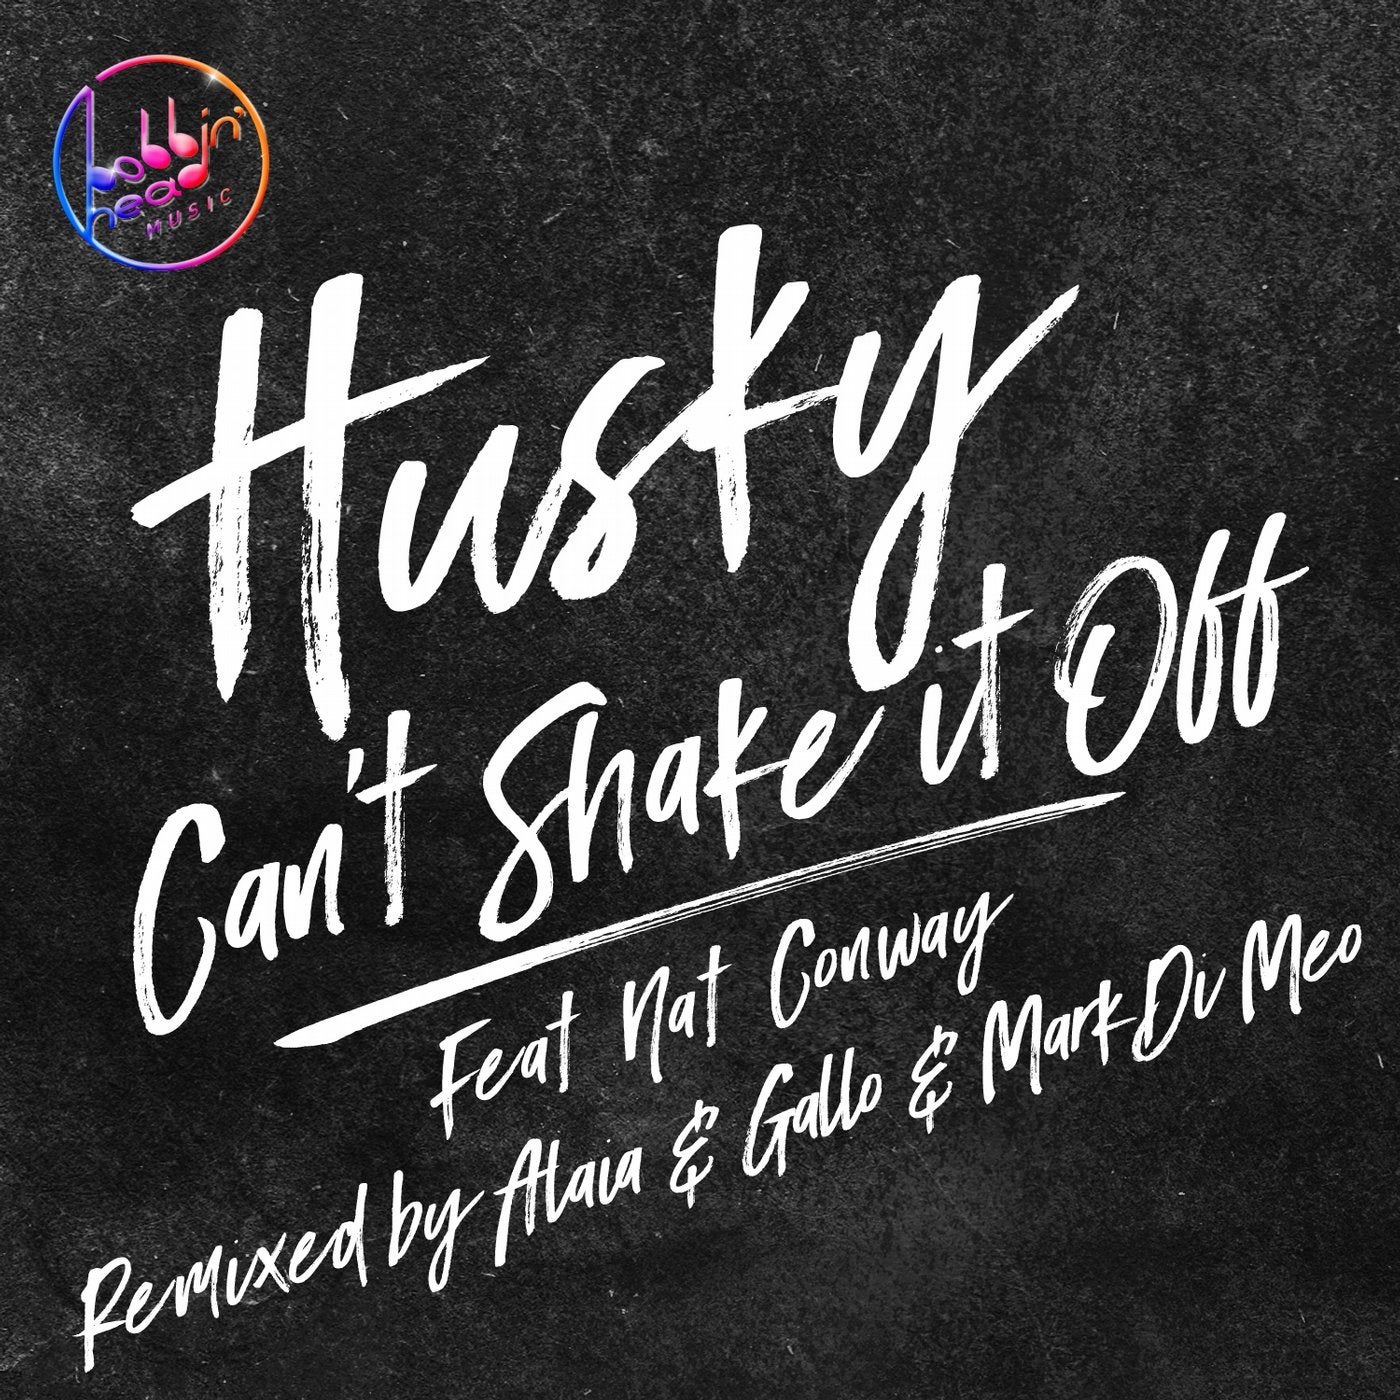 Can't Shake It Off feat. Nat Conway